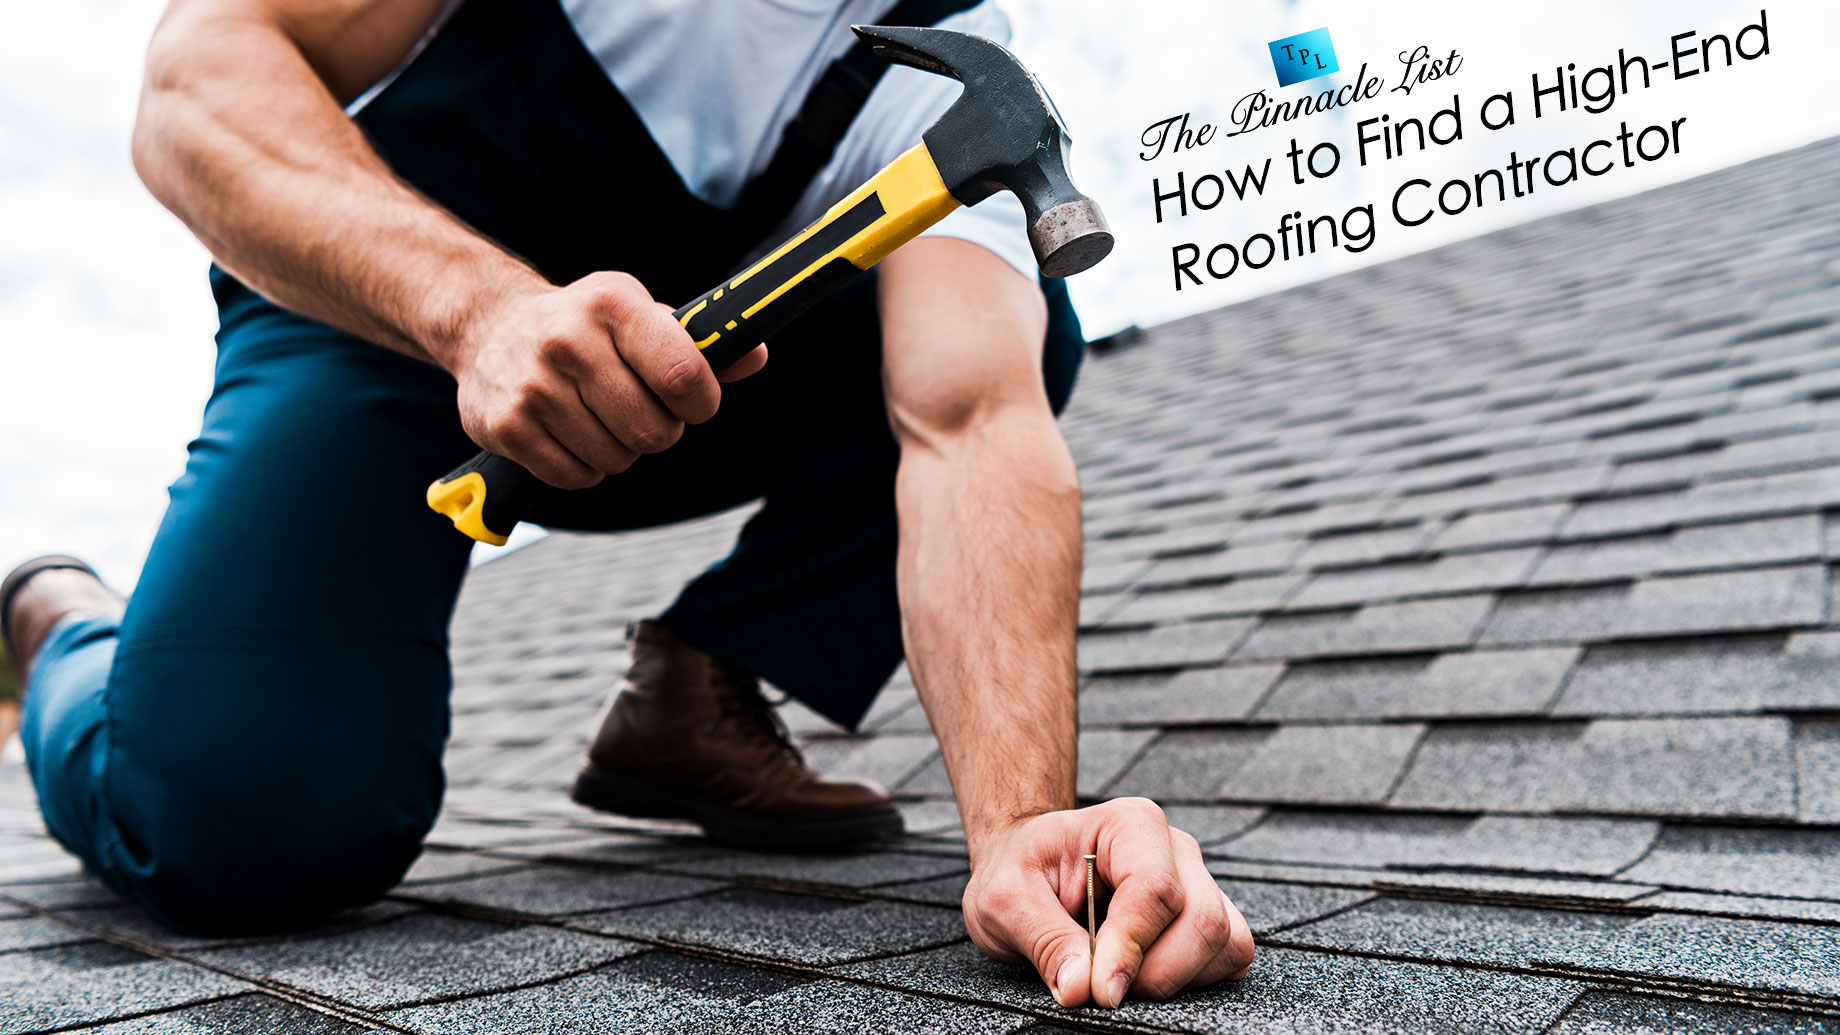 How to Find a High-End Roofing Contractor